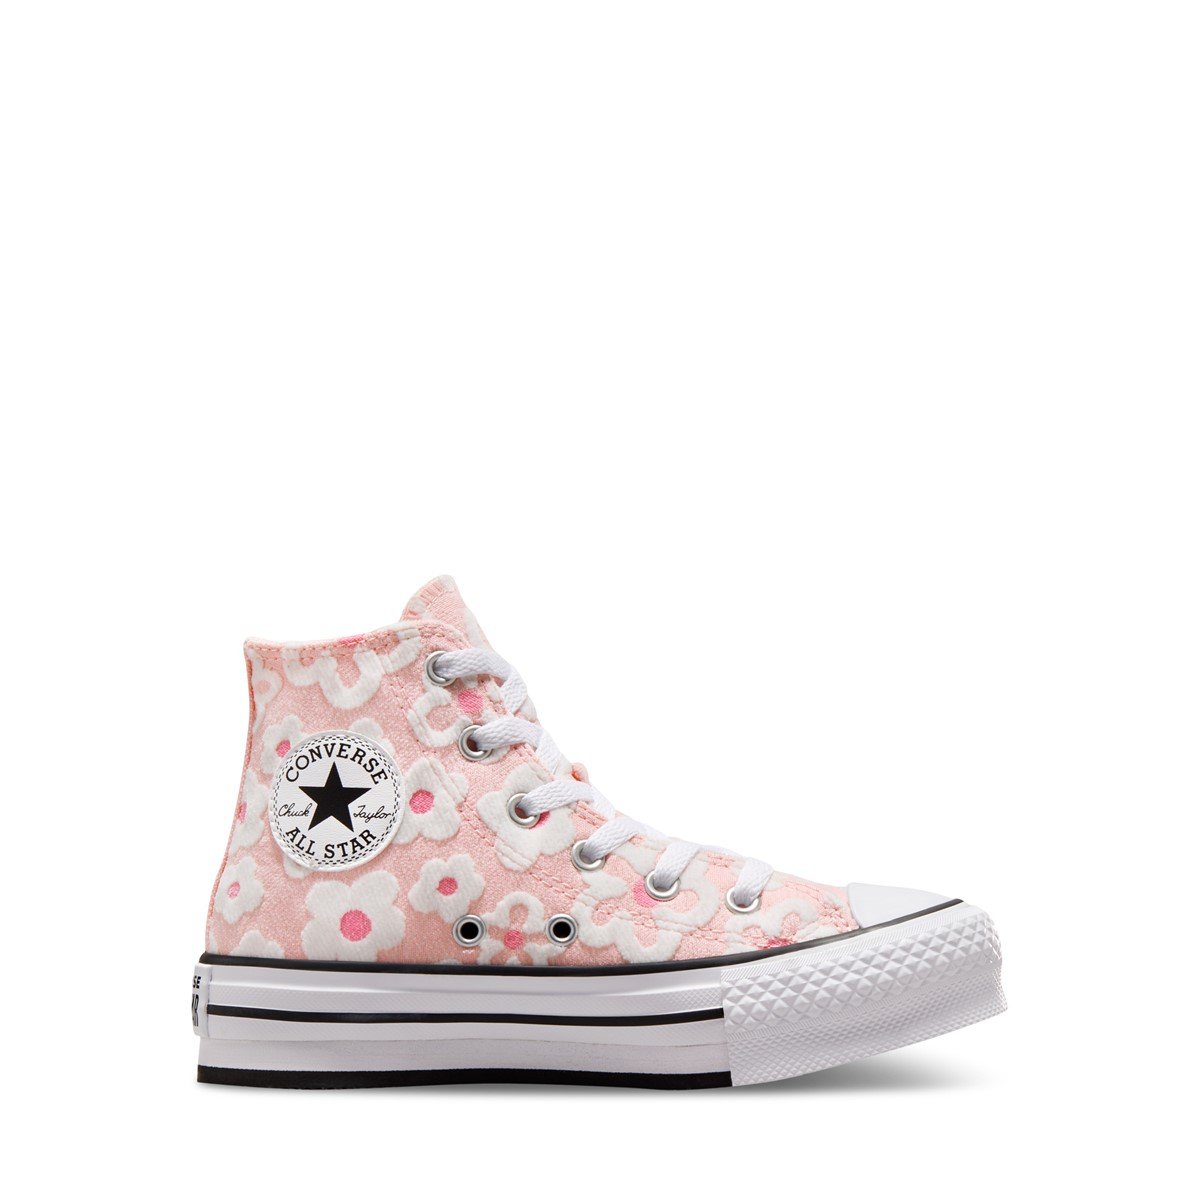 Little Kids' Chuck Taylor All Star Lift Platform Floral Embroidery Sneakers in Pink/White